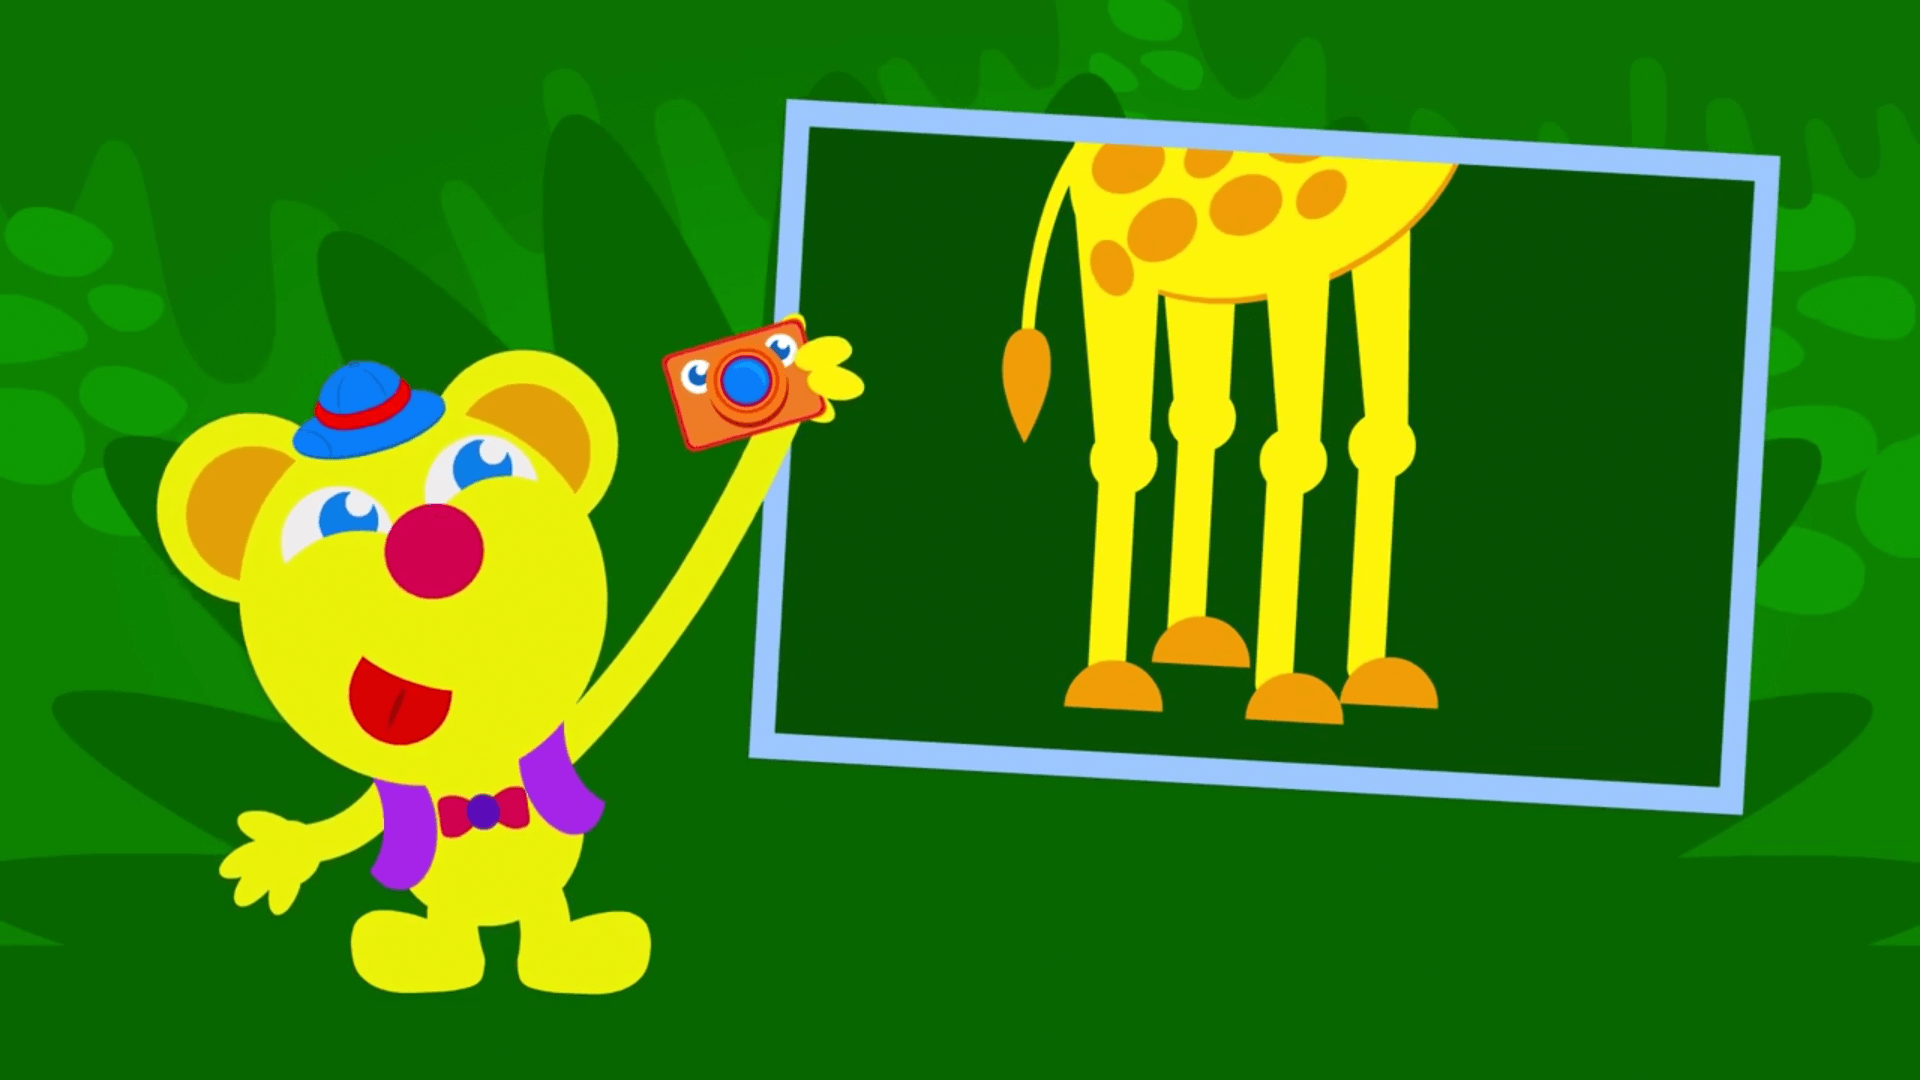 freddy takes a photo of a giraffe in the jungle episode of the kneebouncers show on babyfirsttv